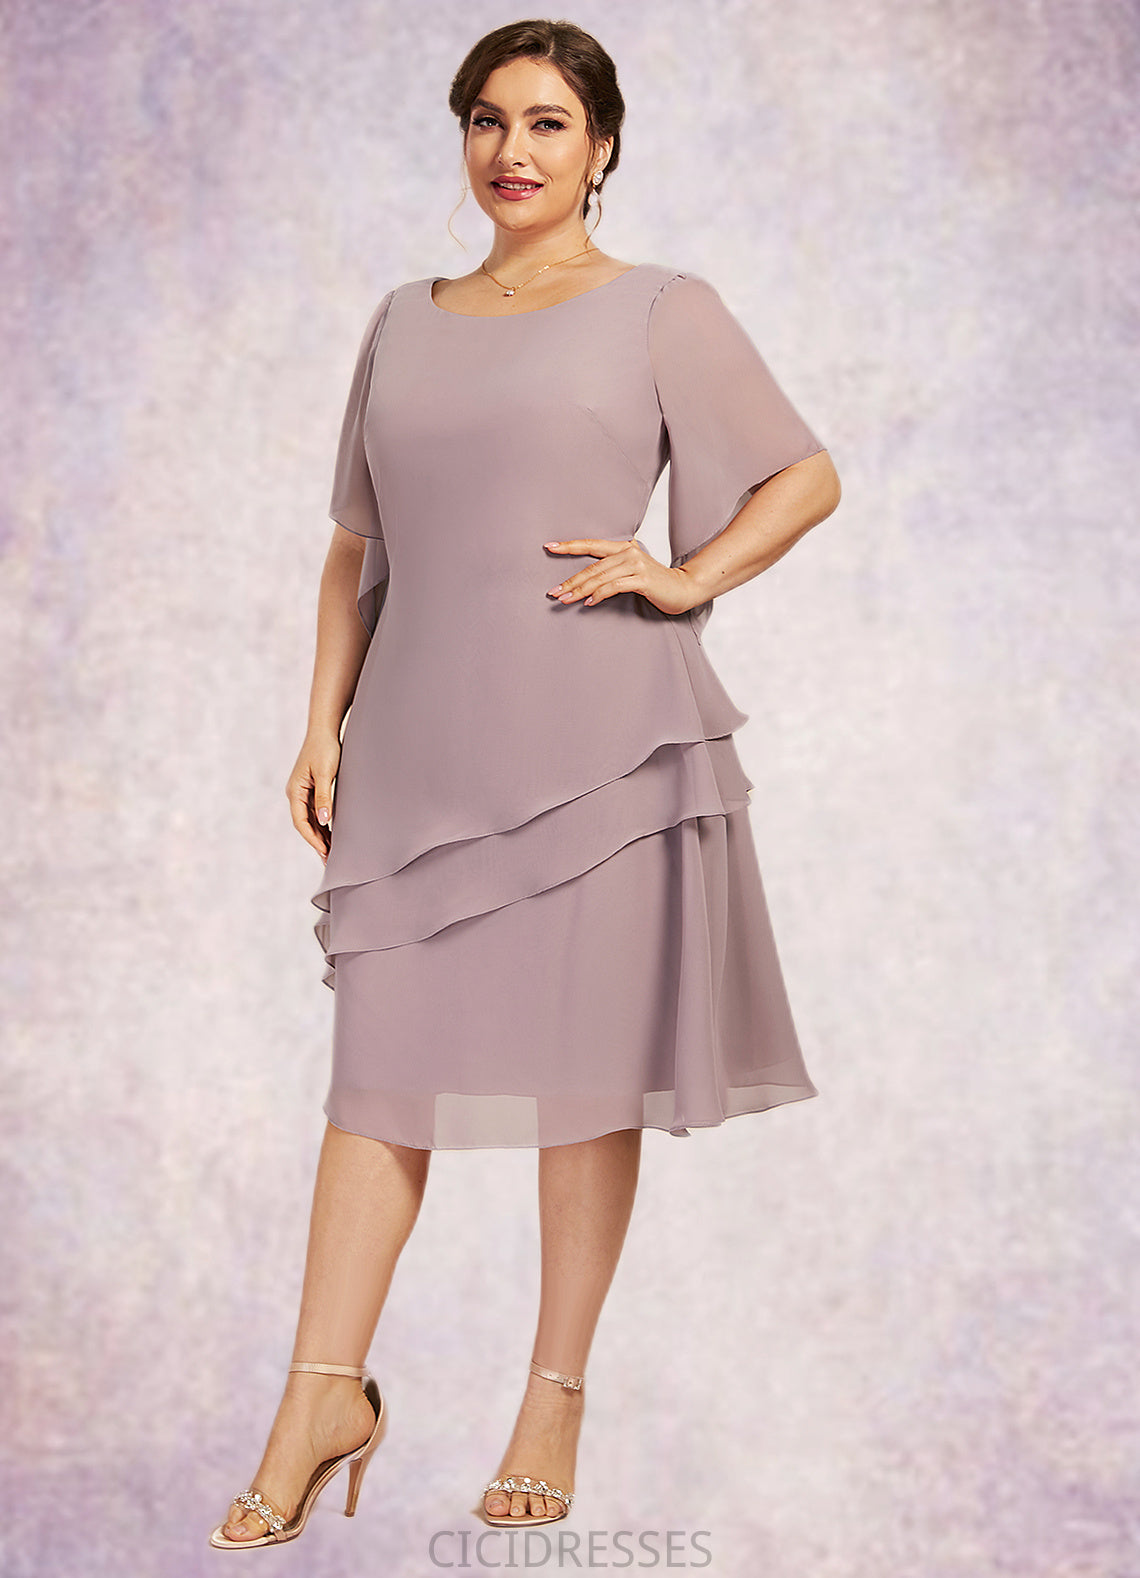 Aurora A-Line Scoop Neck Knee-Length Chiffon Mother of the Bride Dress With Cascading Ruffles CIC8126P0014755